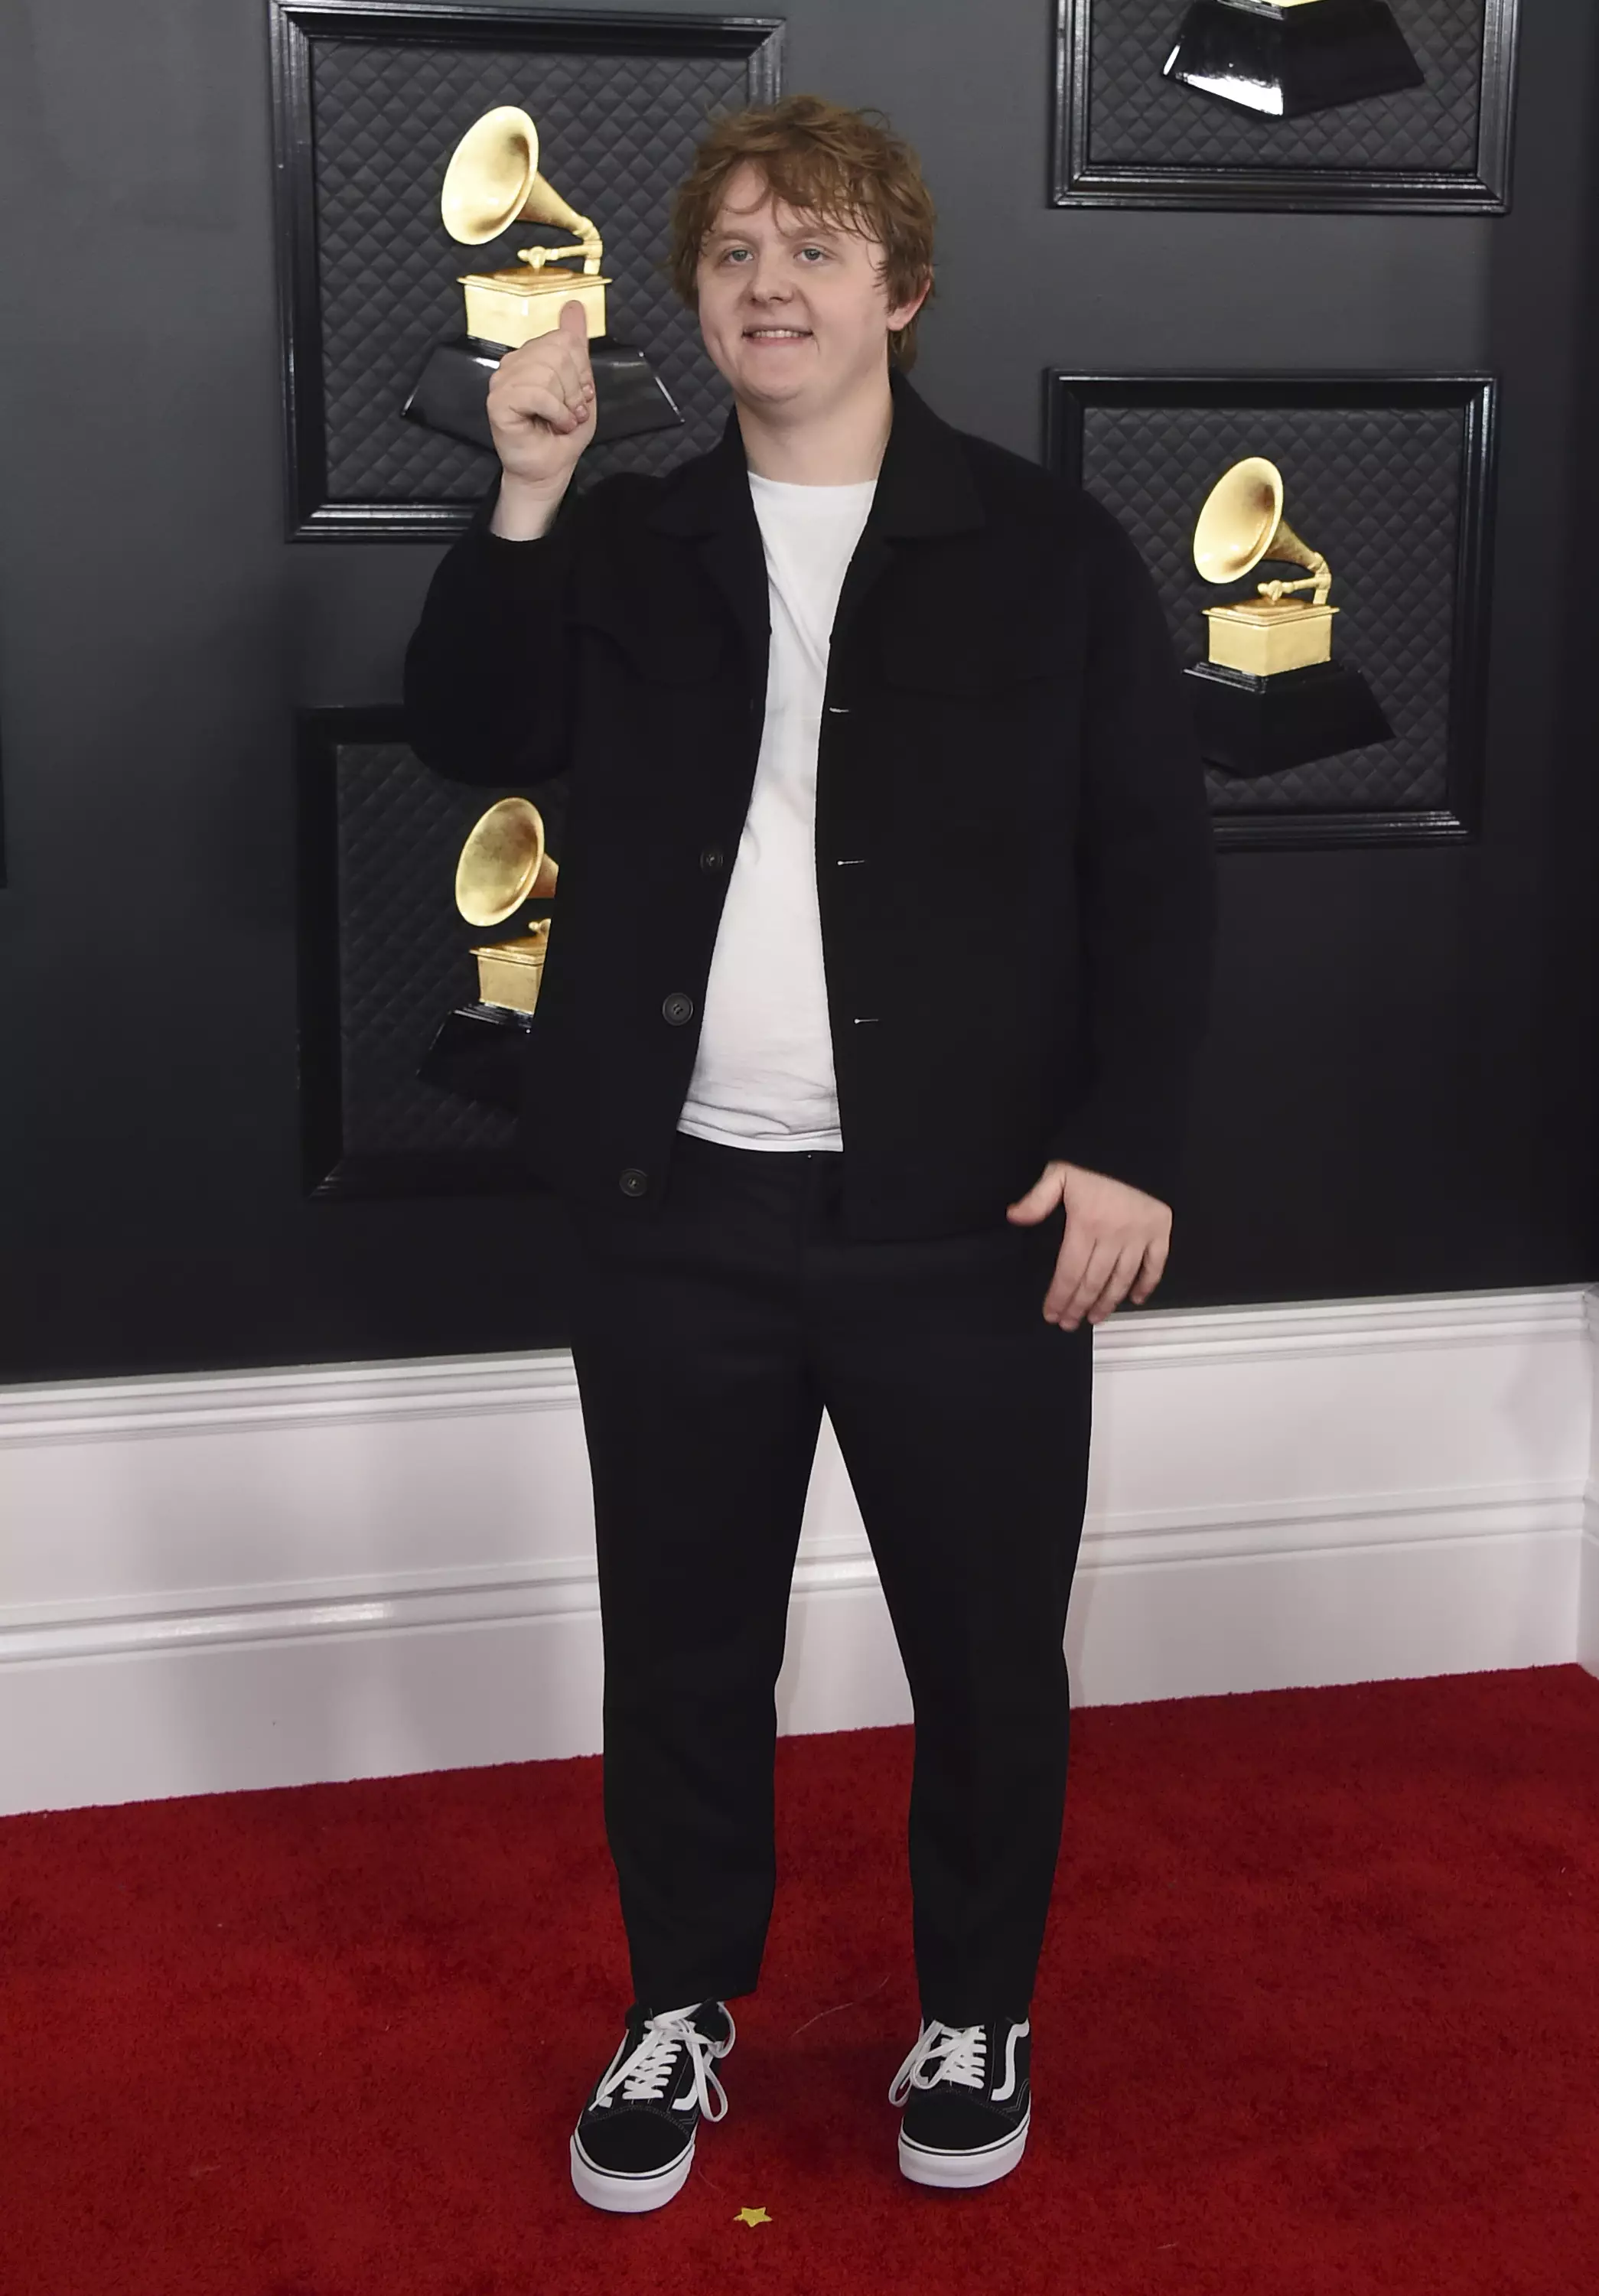 Lewis Capaldi says he was mistaken for a member of staff at the Grammys.